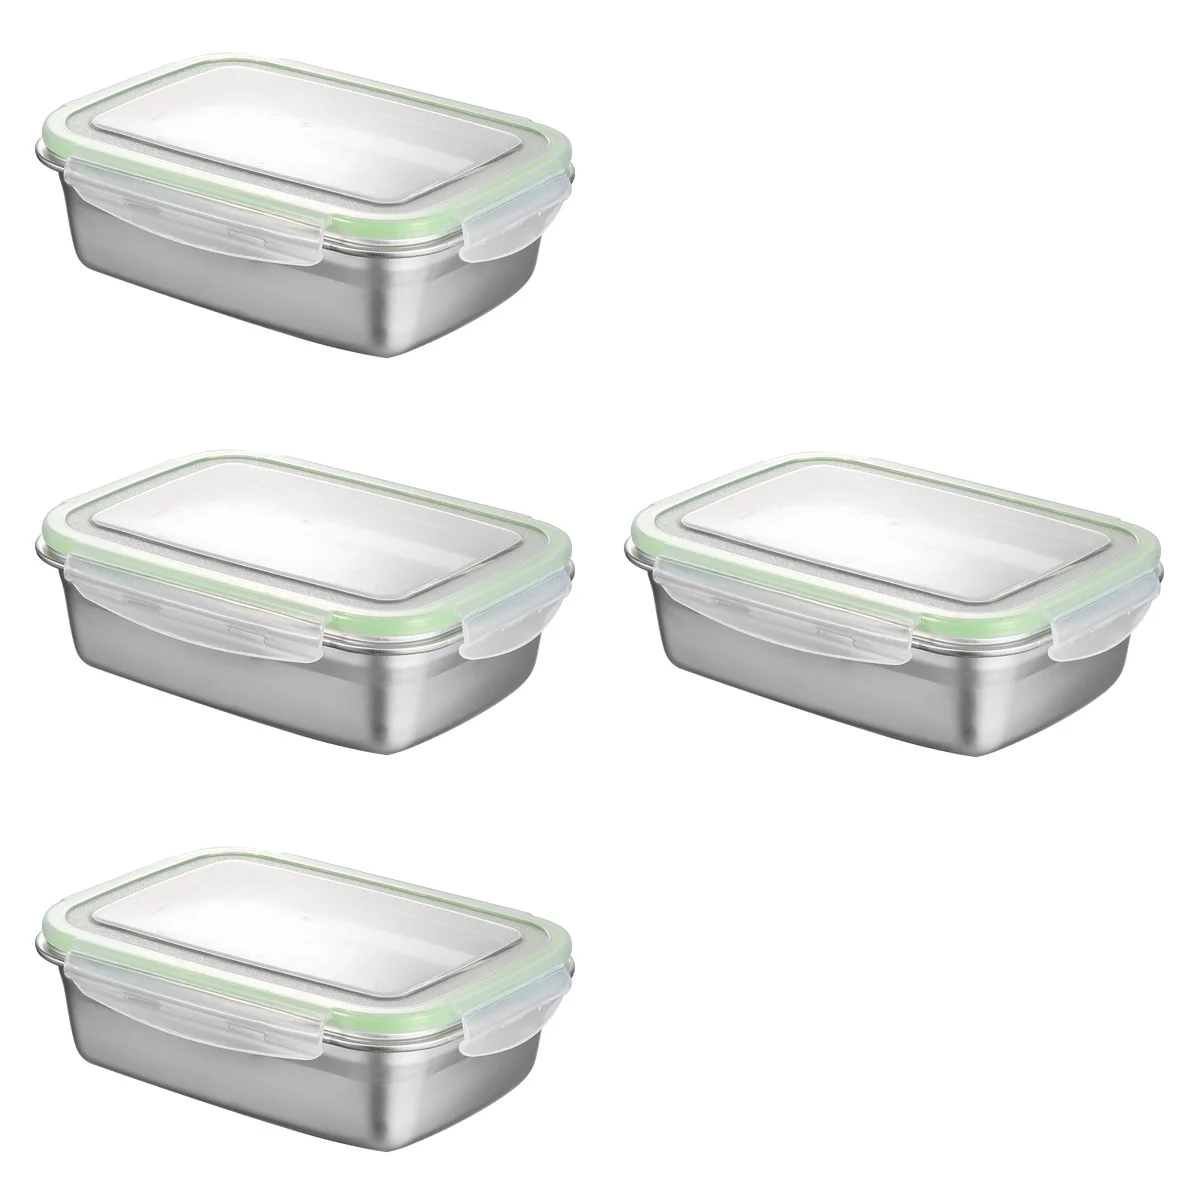 

4pcs Stainless Steel Lunch Box Sealing Crisper Heat Insulation Food Container for Home Office (Green, 350ML)